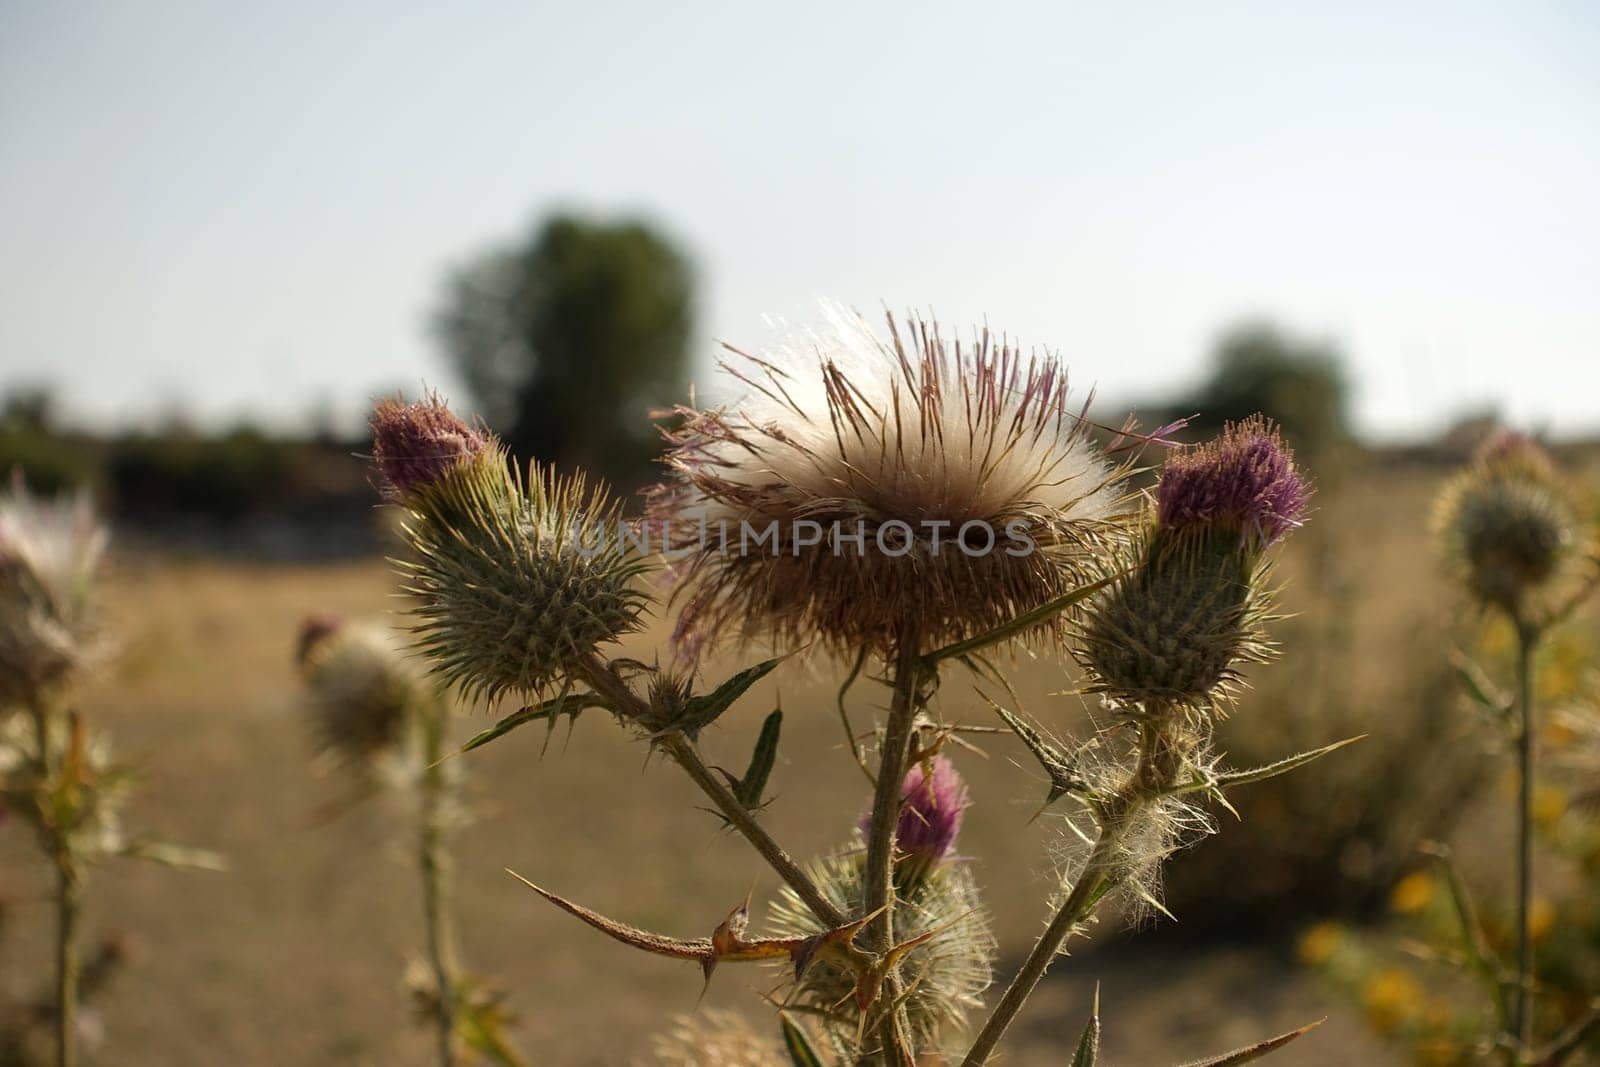 thistle plant, thistle cardus marianus thistle plant starting to dry, medicinal , silybum marianum plant, by nhatipoglu